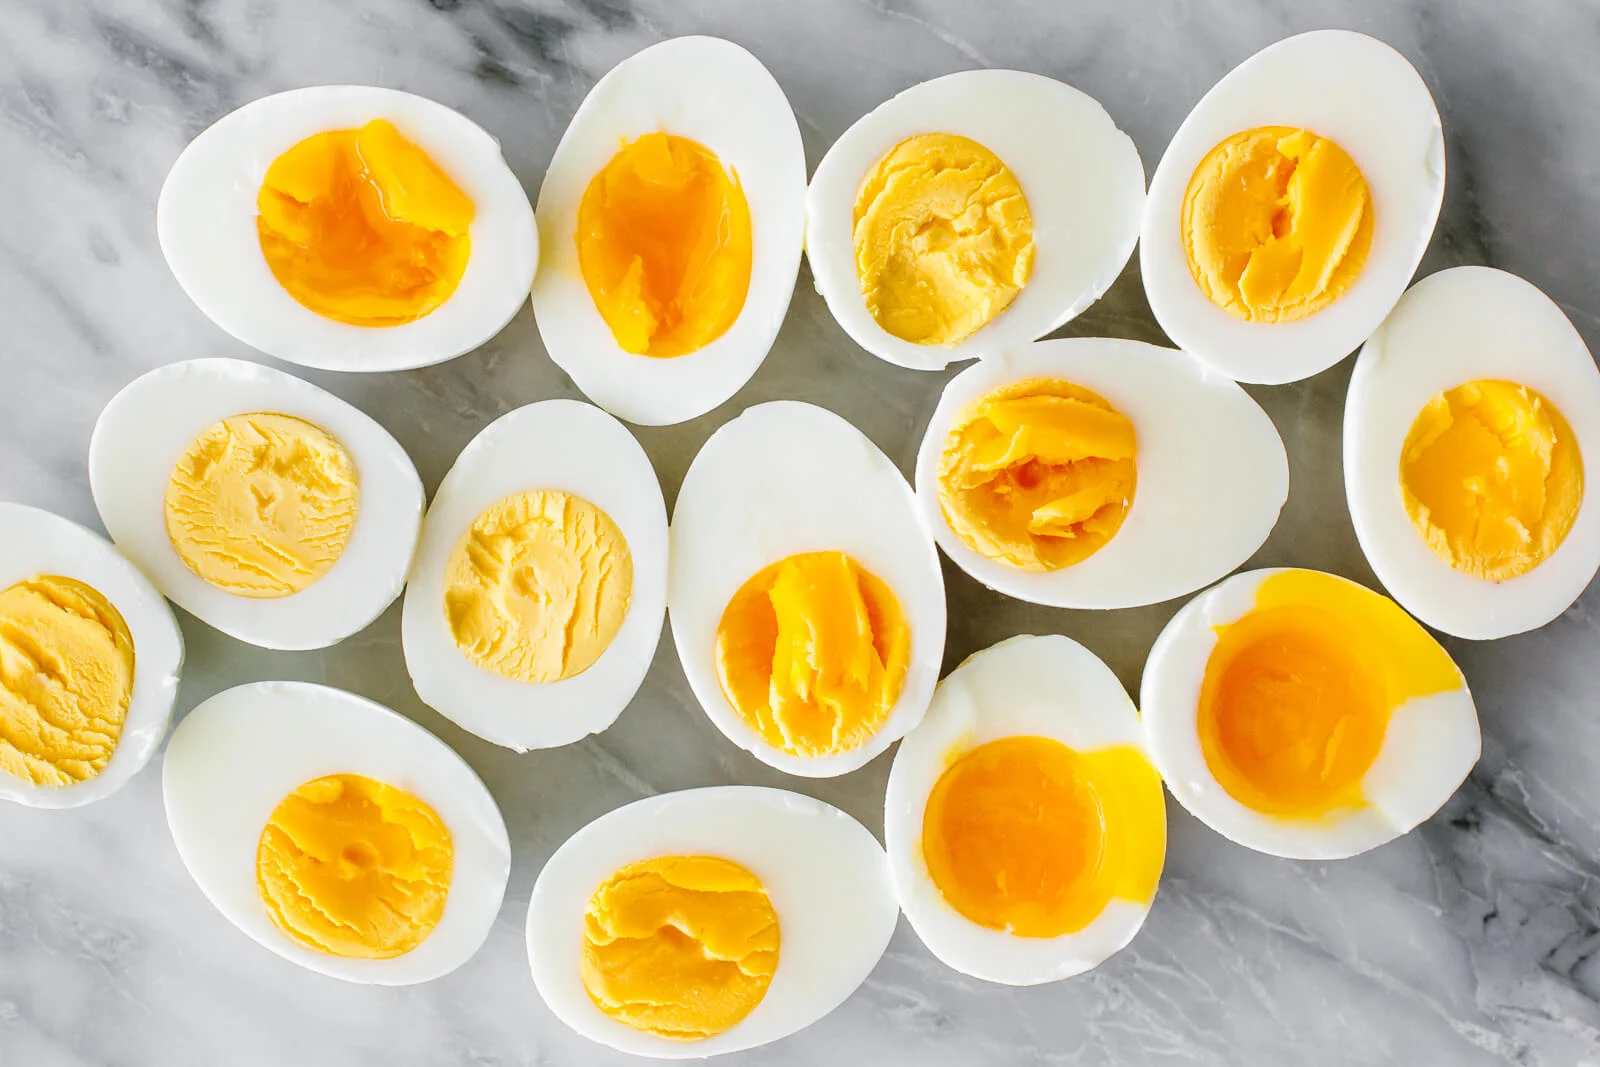 How To Store Cooked Eggs